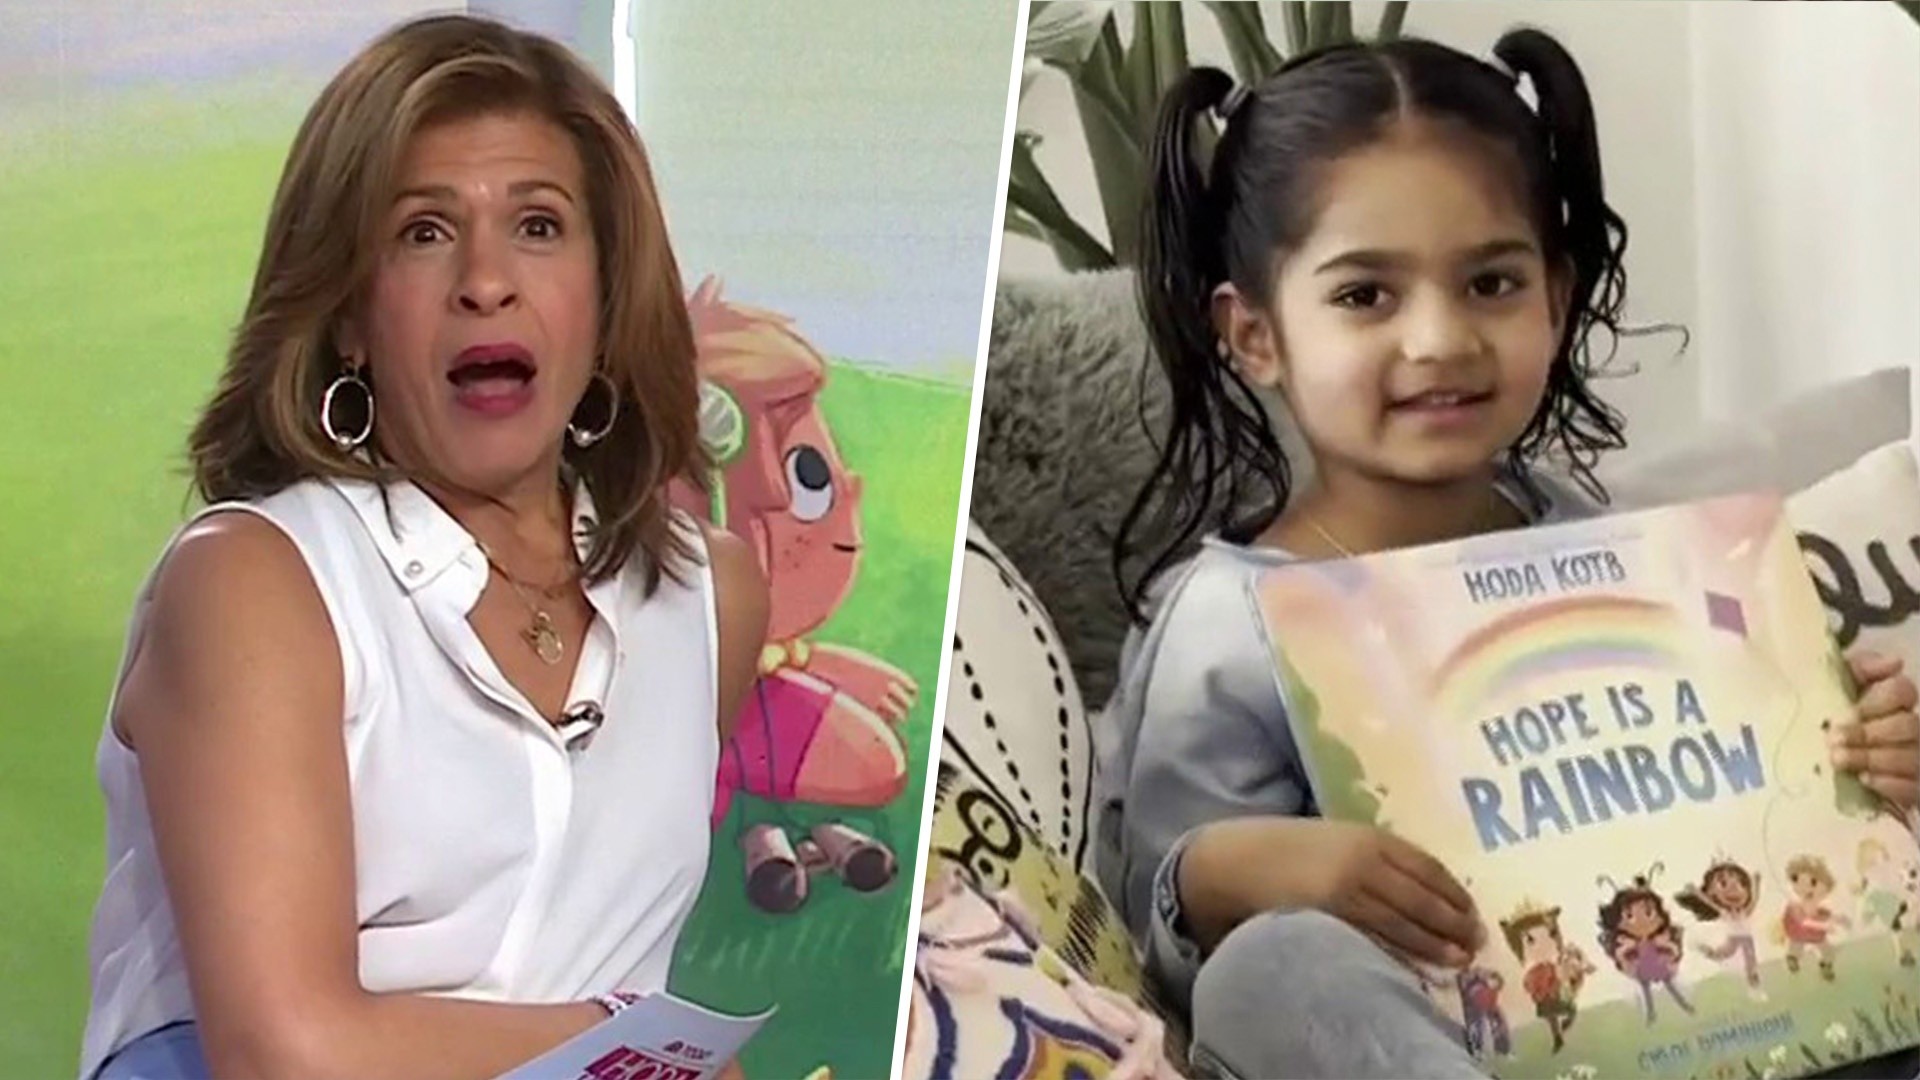 Hoda's daughter sends her sweet message for 'Hope Is a Rainbow'